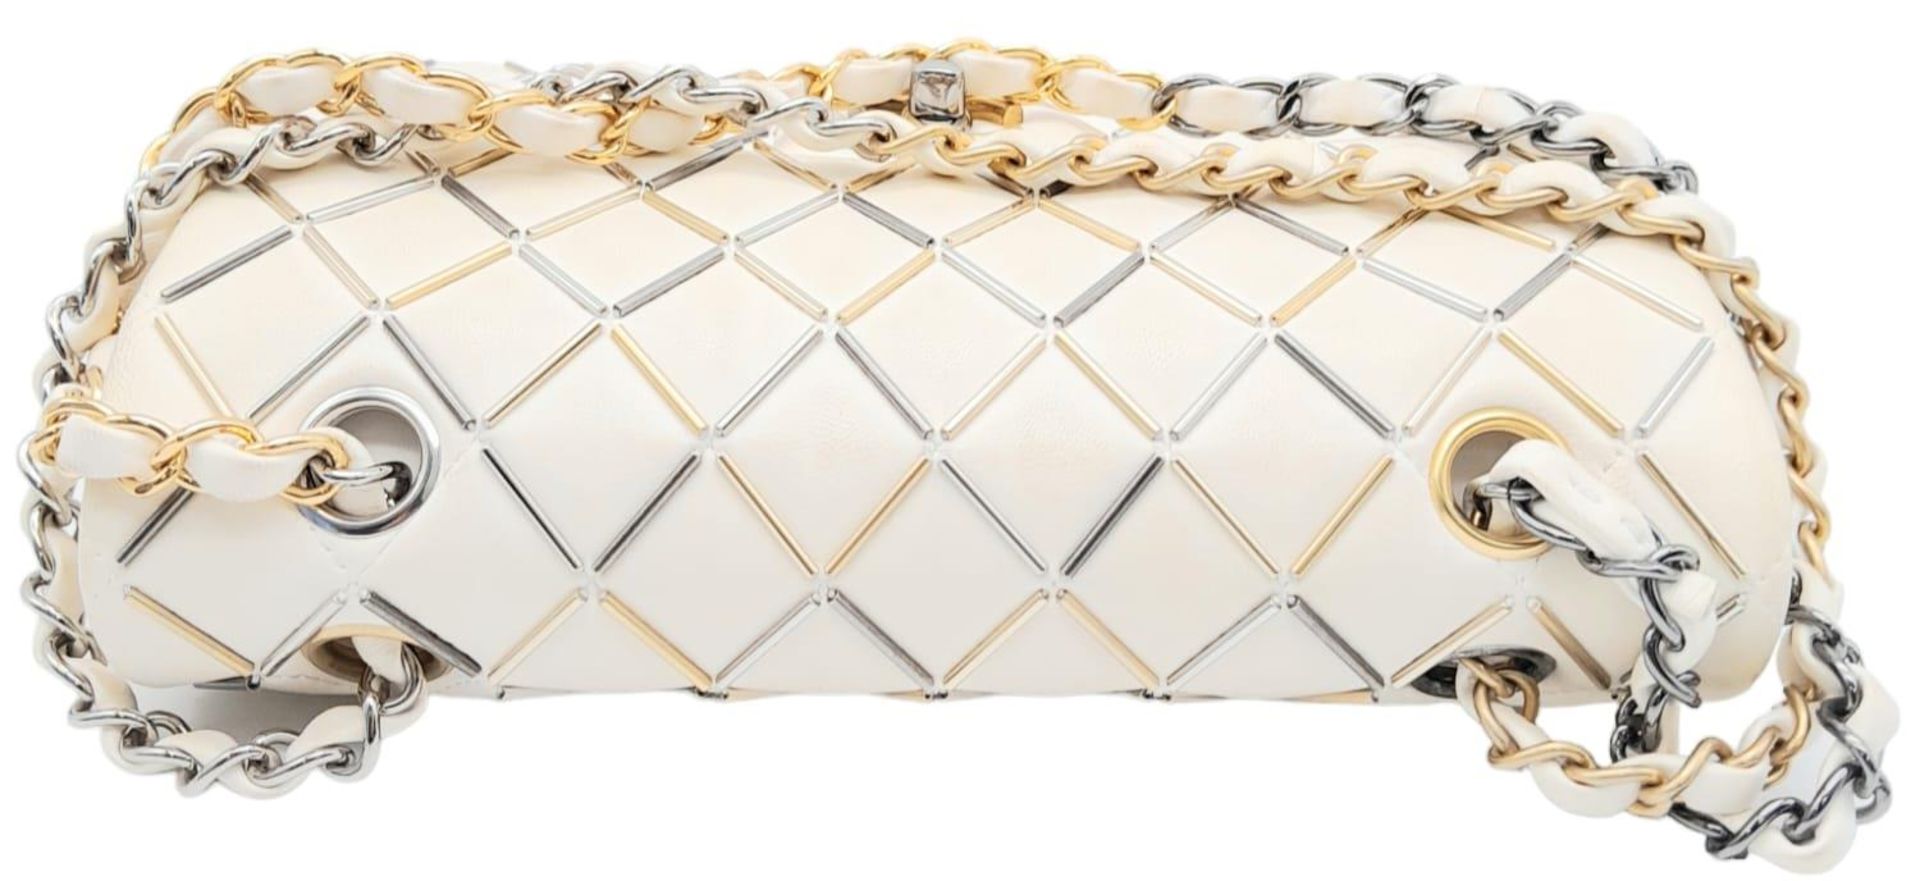 Timeless Chanel Double Flap Bag. Limited edition, it is part of the Metier d'Art collection year - Image 7 of 21